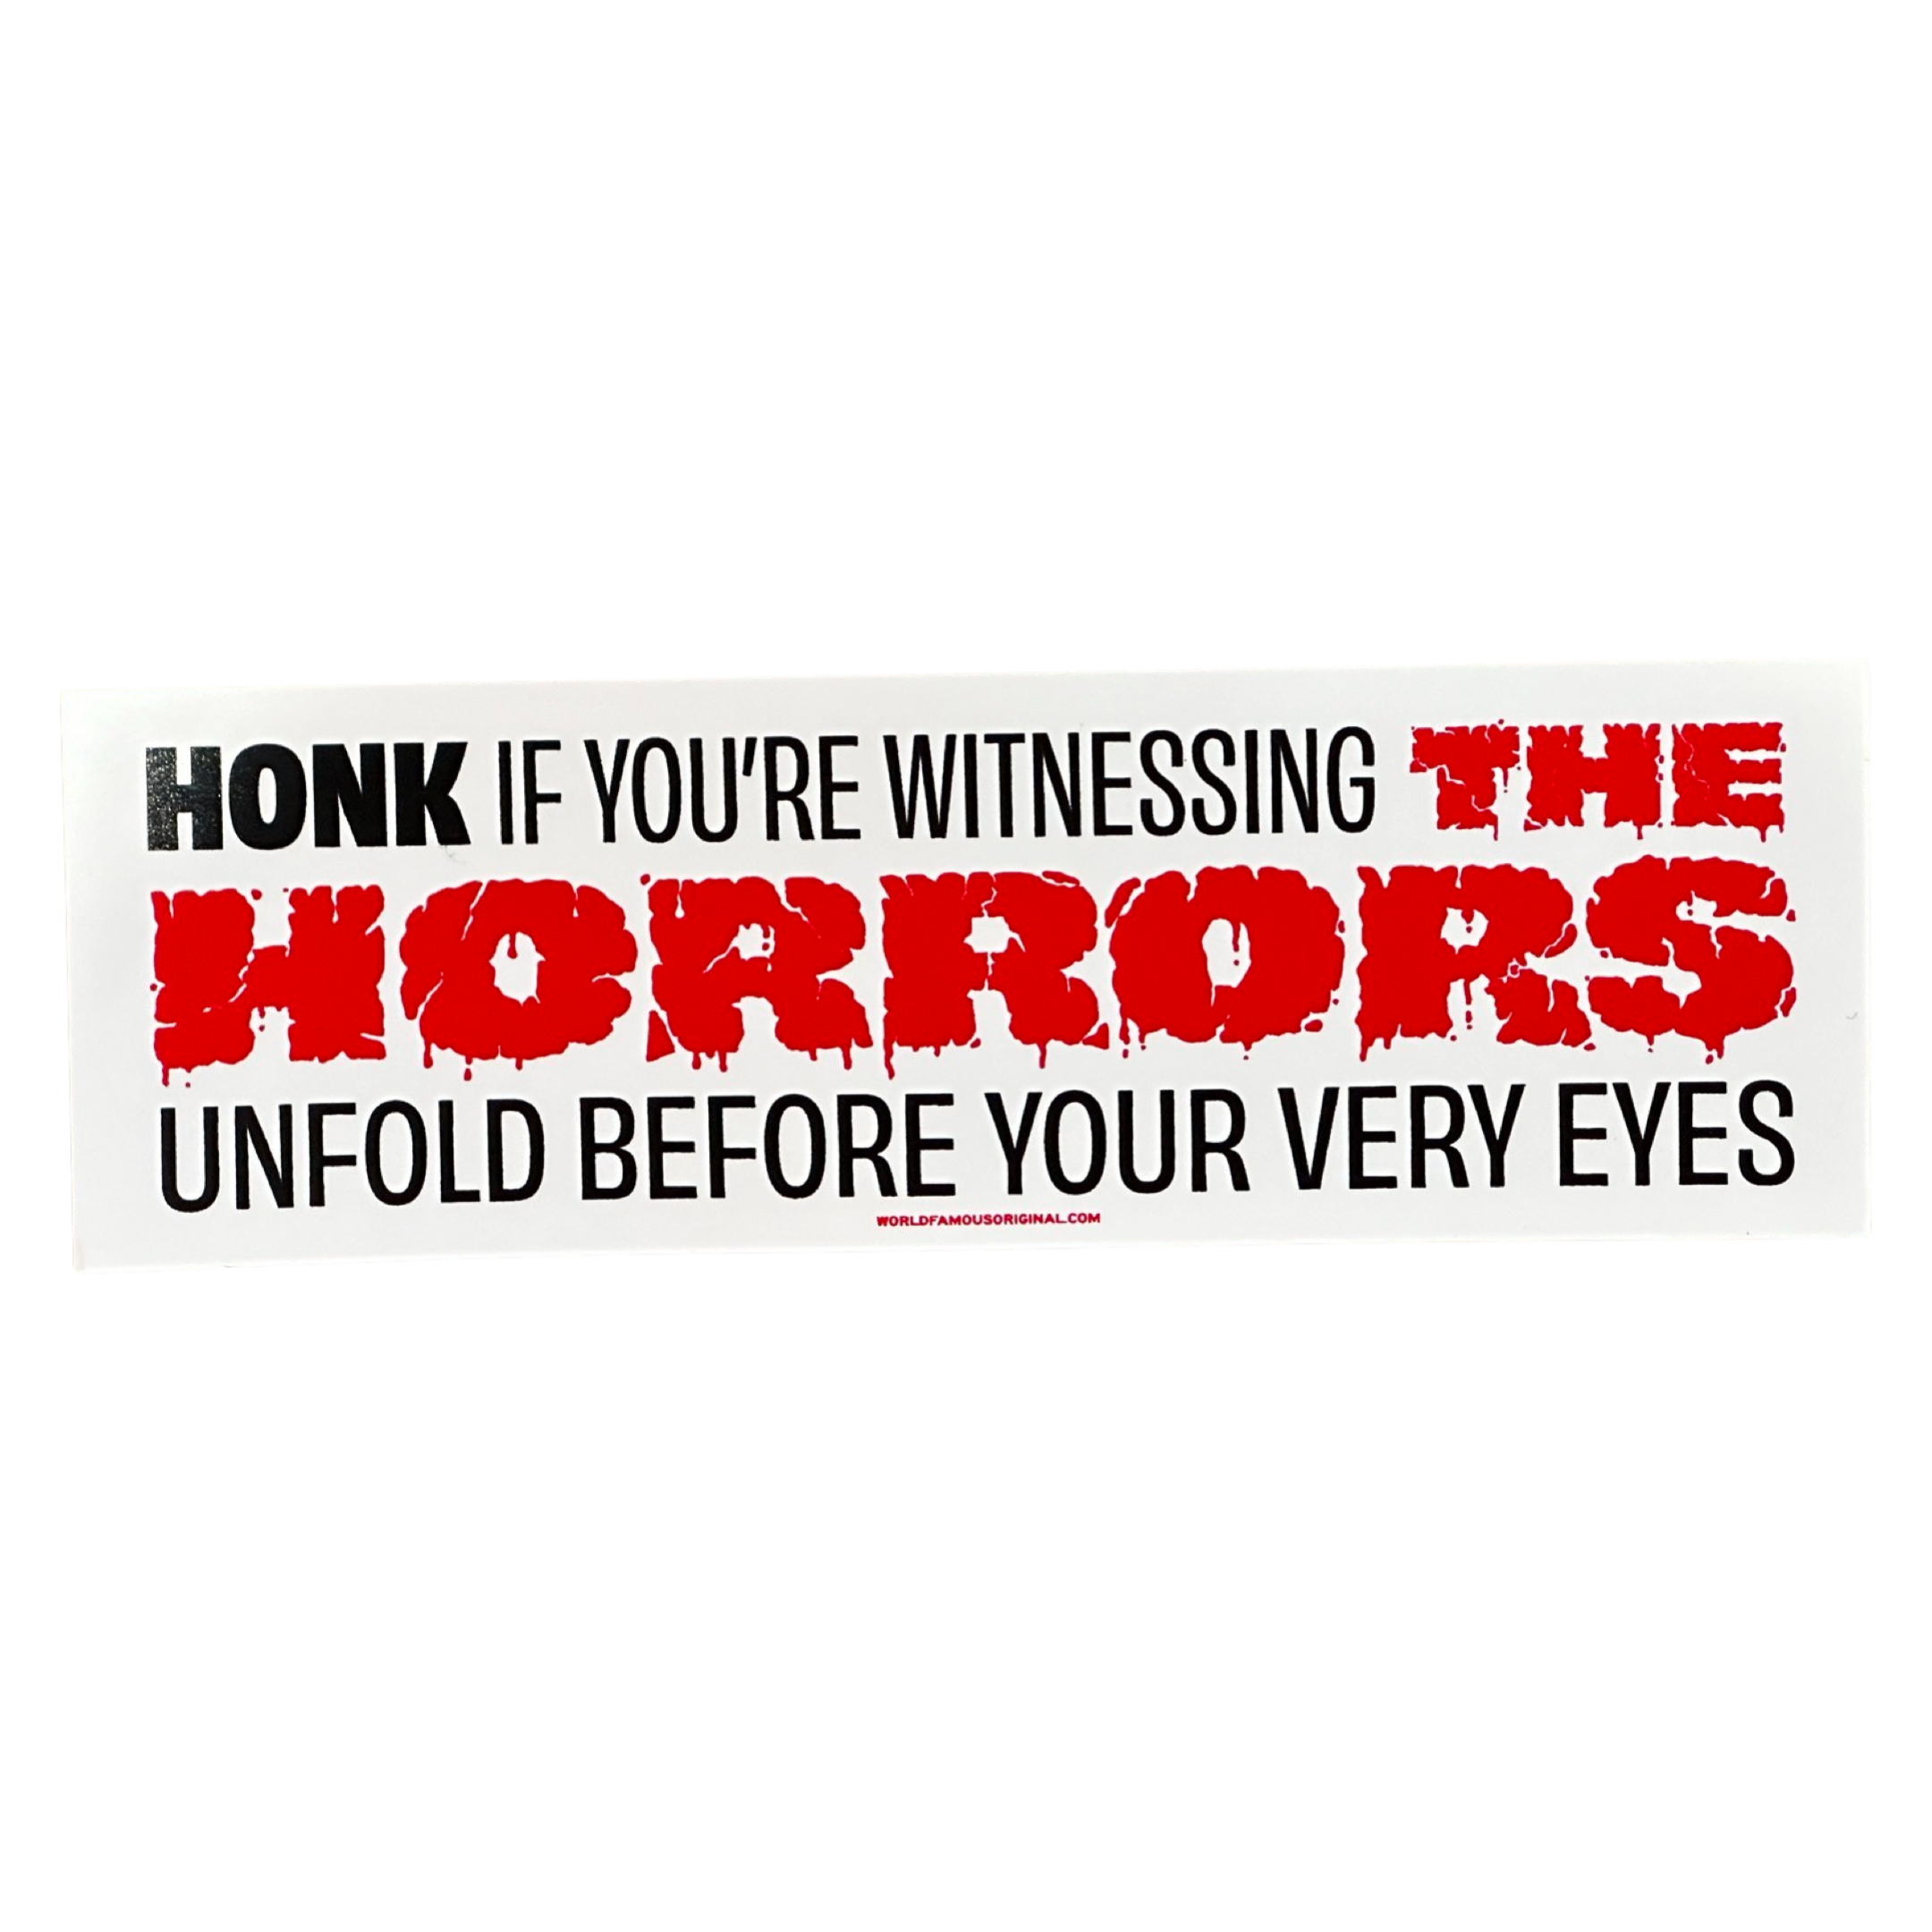 Honk If You're Witnessing The Horrors - Bumper Sticker